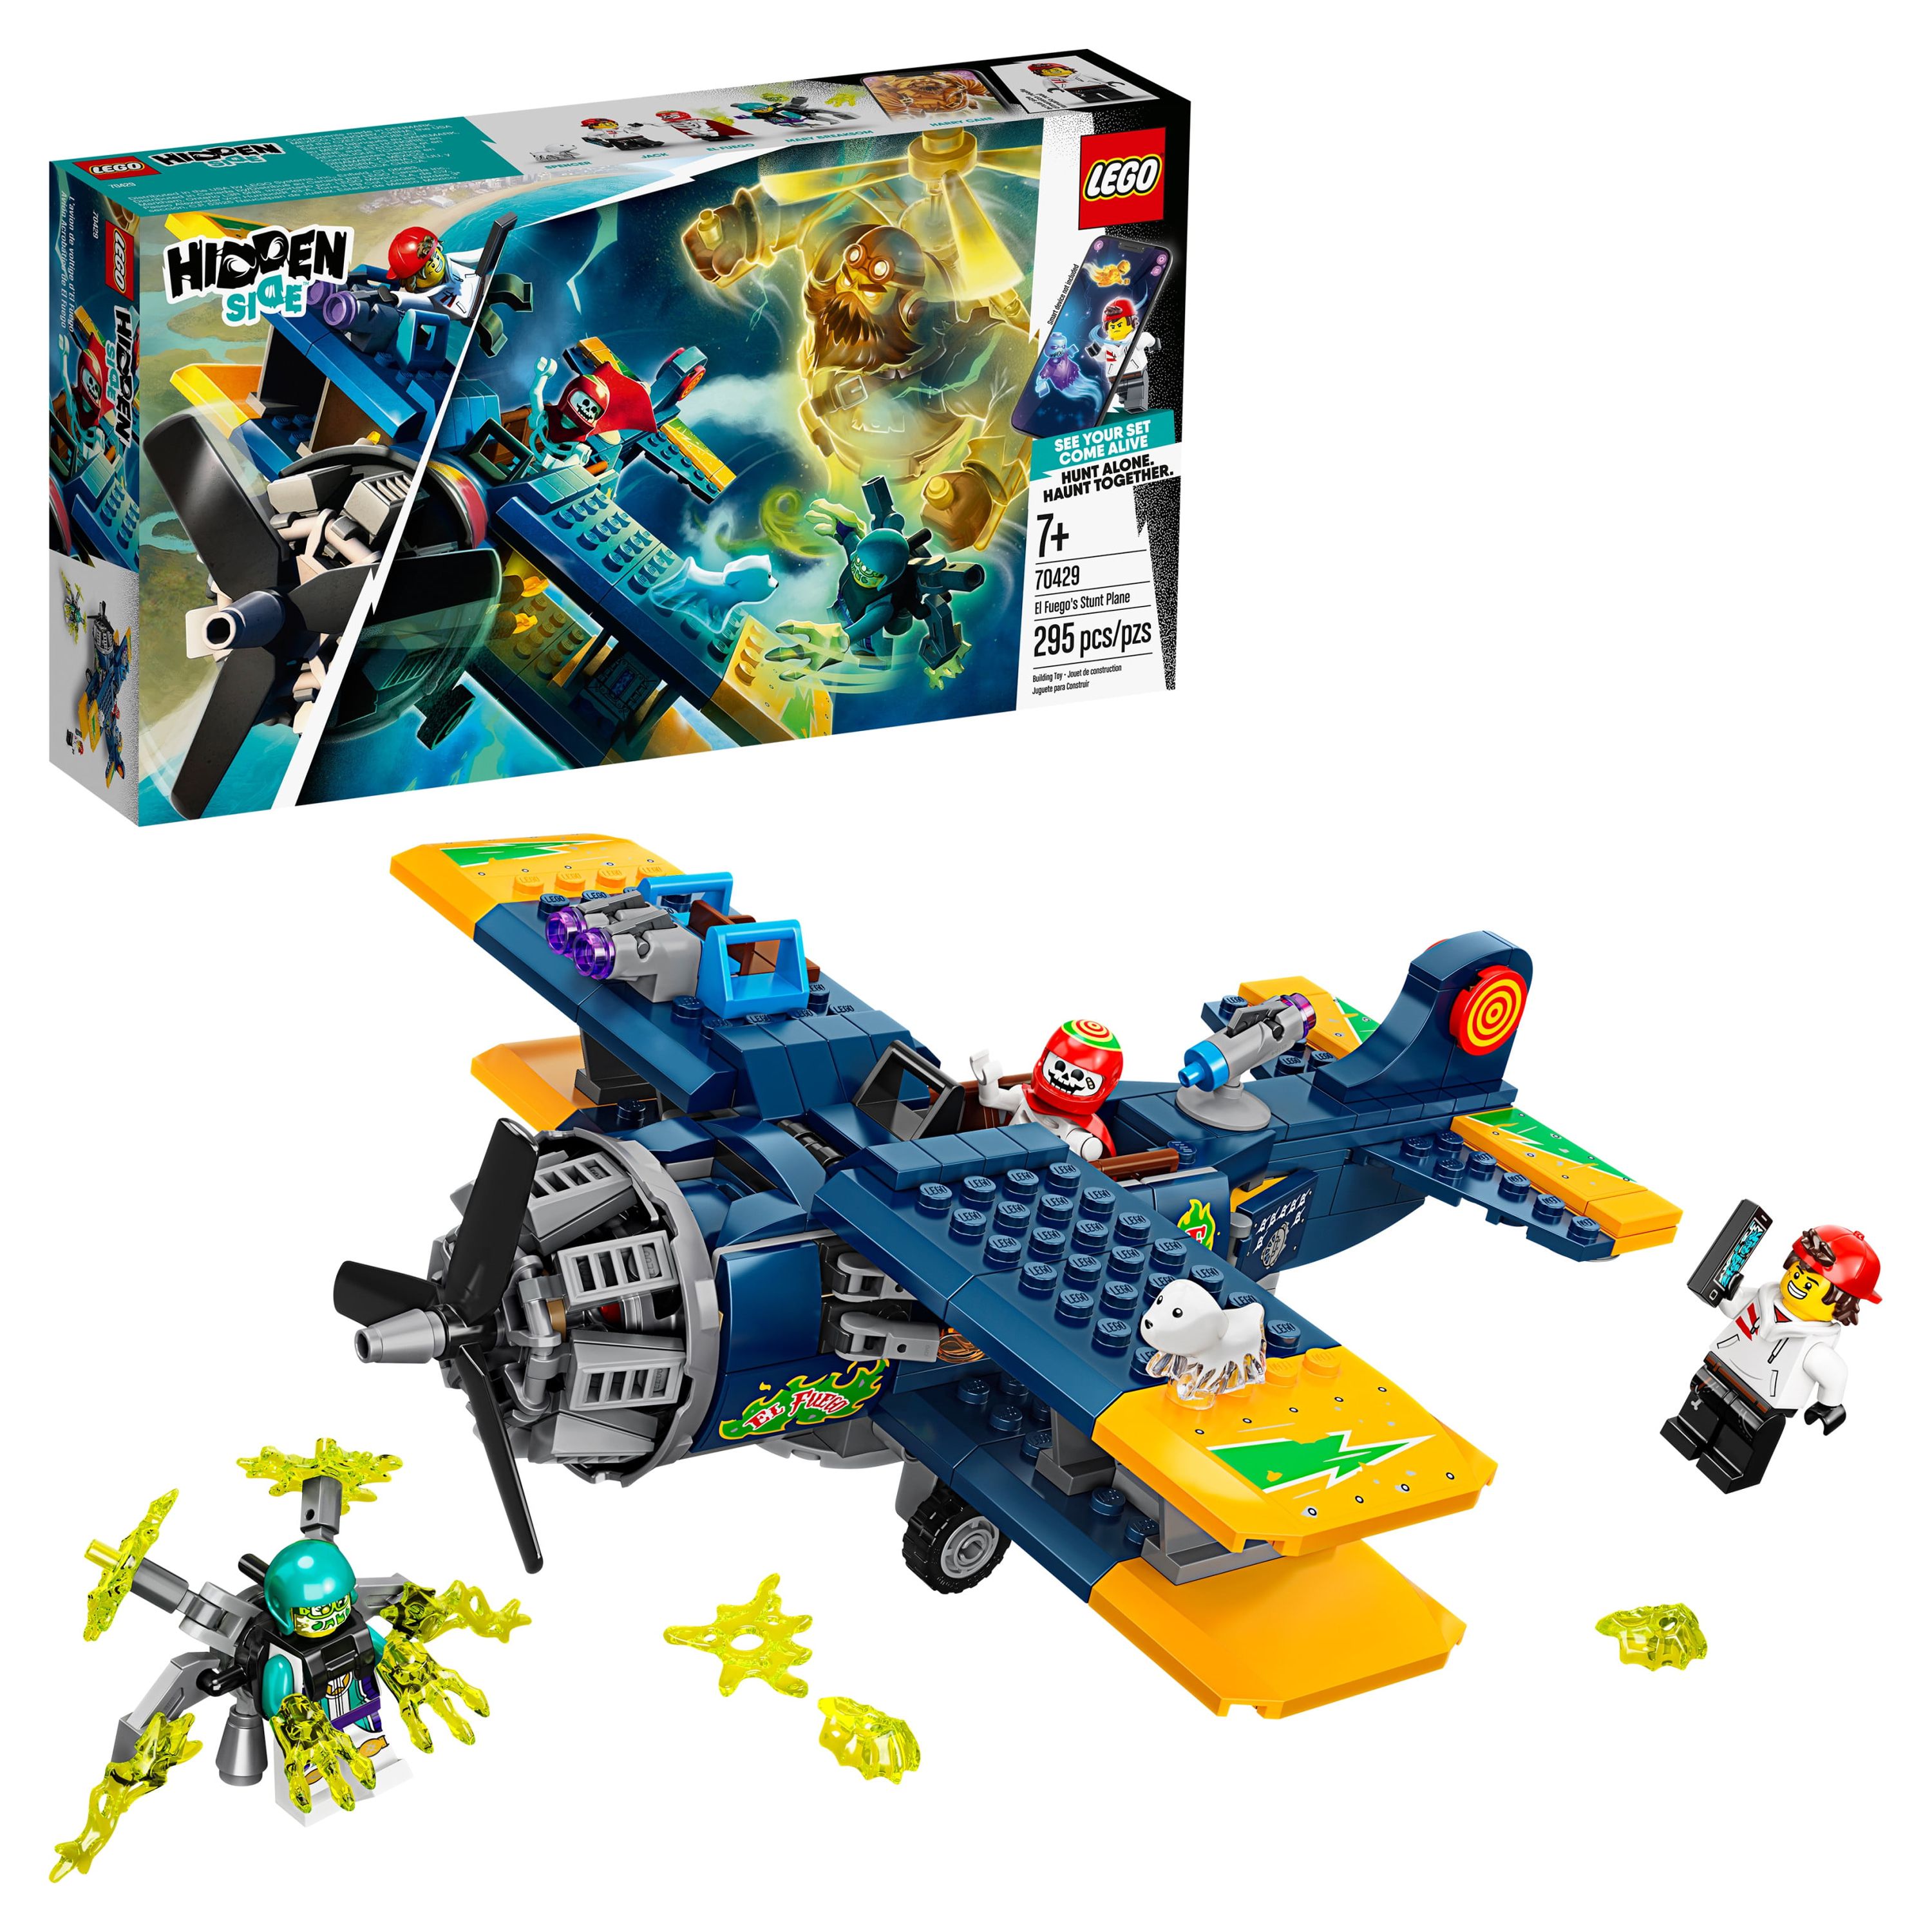 LEGO Hidden Side El Fuego's Stunt Plane 70429 Augmented Reality (AR) Play Experience for Kids (295 Pieces) - image 1 of 4